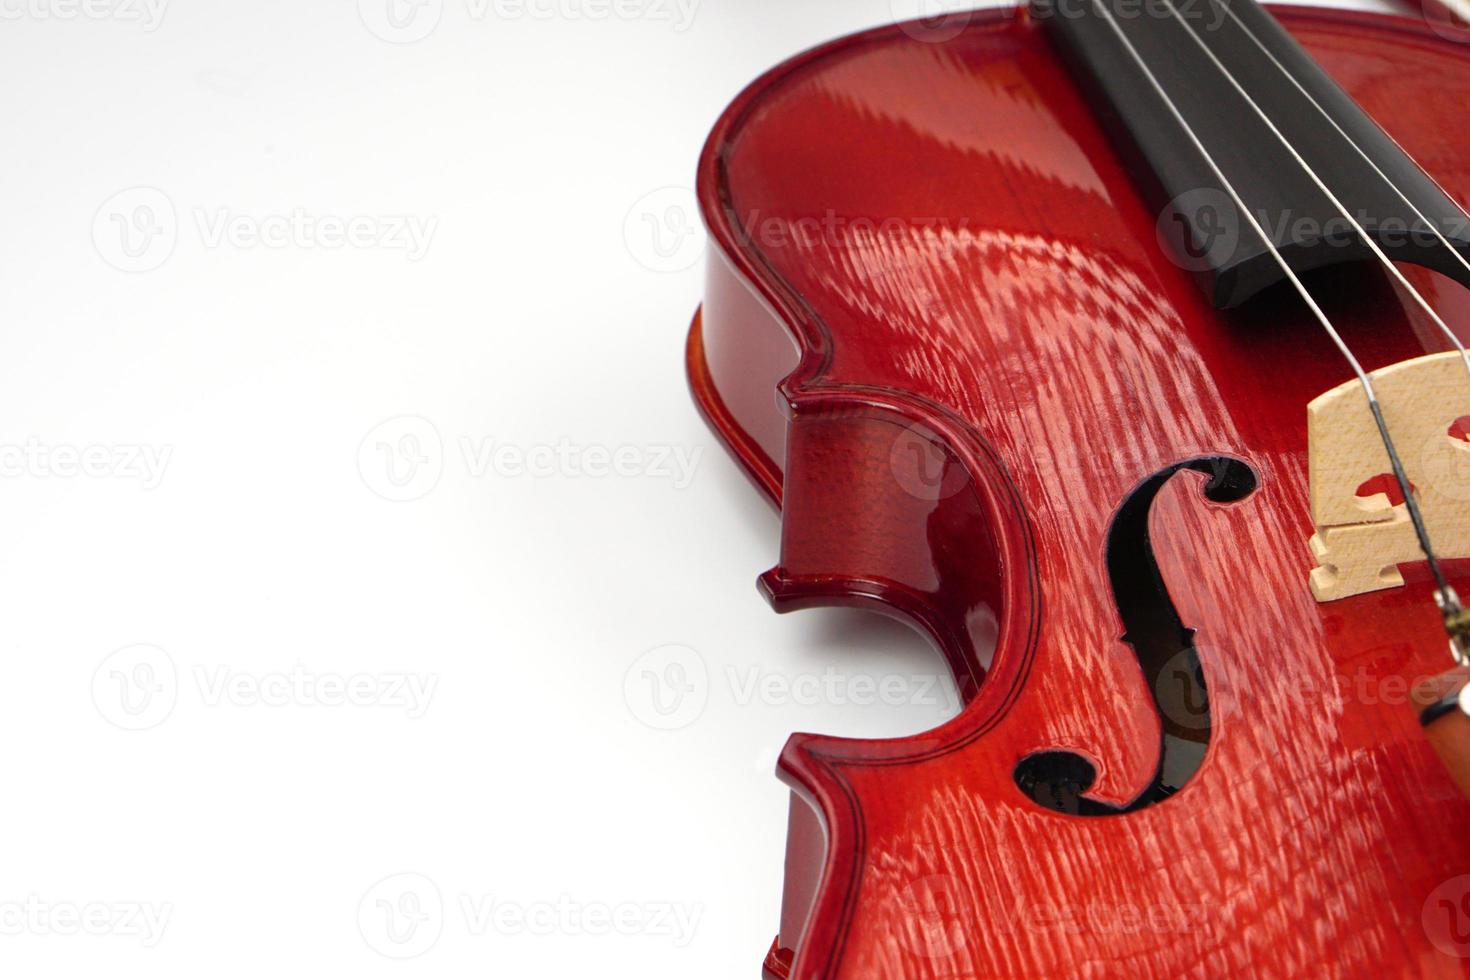 Close up of Violin Against on white background with copy space. Instrument and musical concept. photo